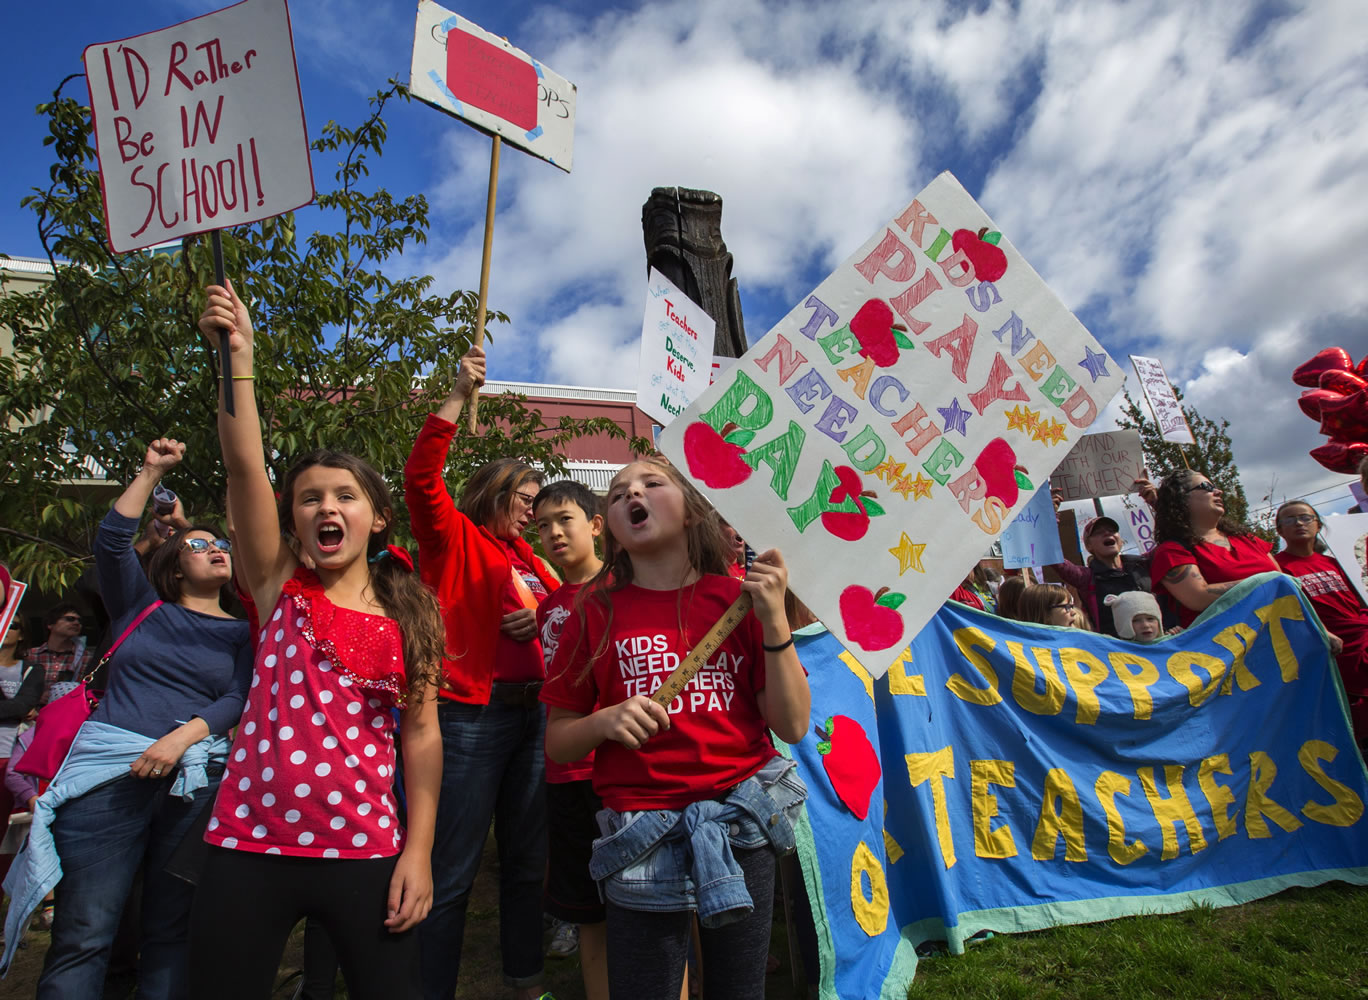 Sydney Stumpf, left, and Aderyn Kee, both students at Loyal Heights Elementary School, protest after marching with parents, students and supporters of teachers from Pioneer Square to the John Stanford Center on Tuesday in Seattle. Teachers who had been on the picket lines for a week will be back in the classroom today. (Ellen M.